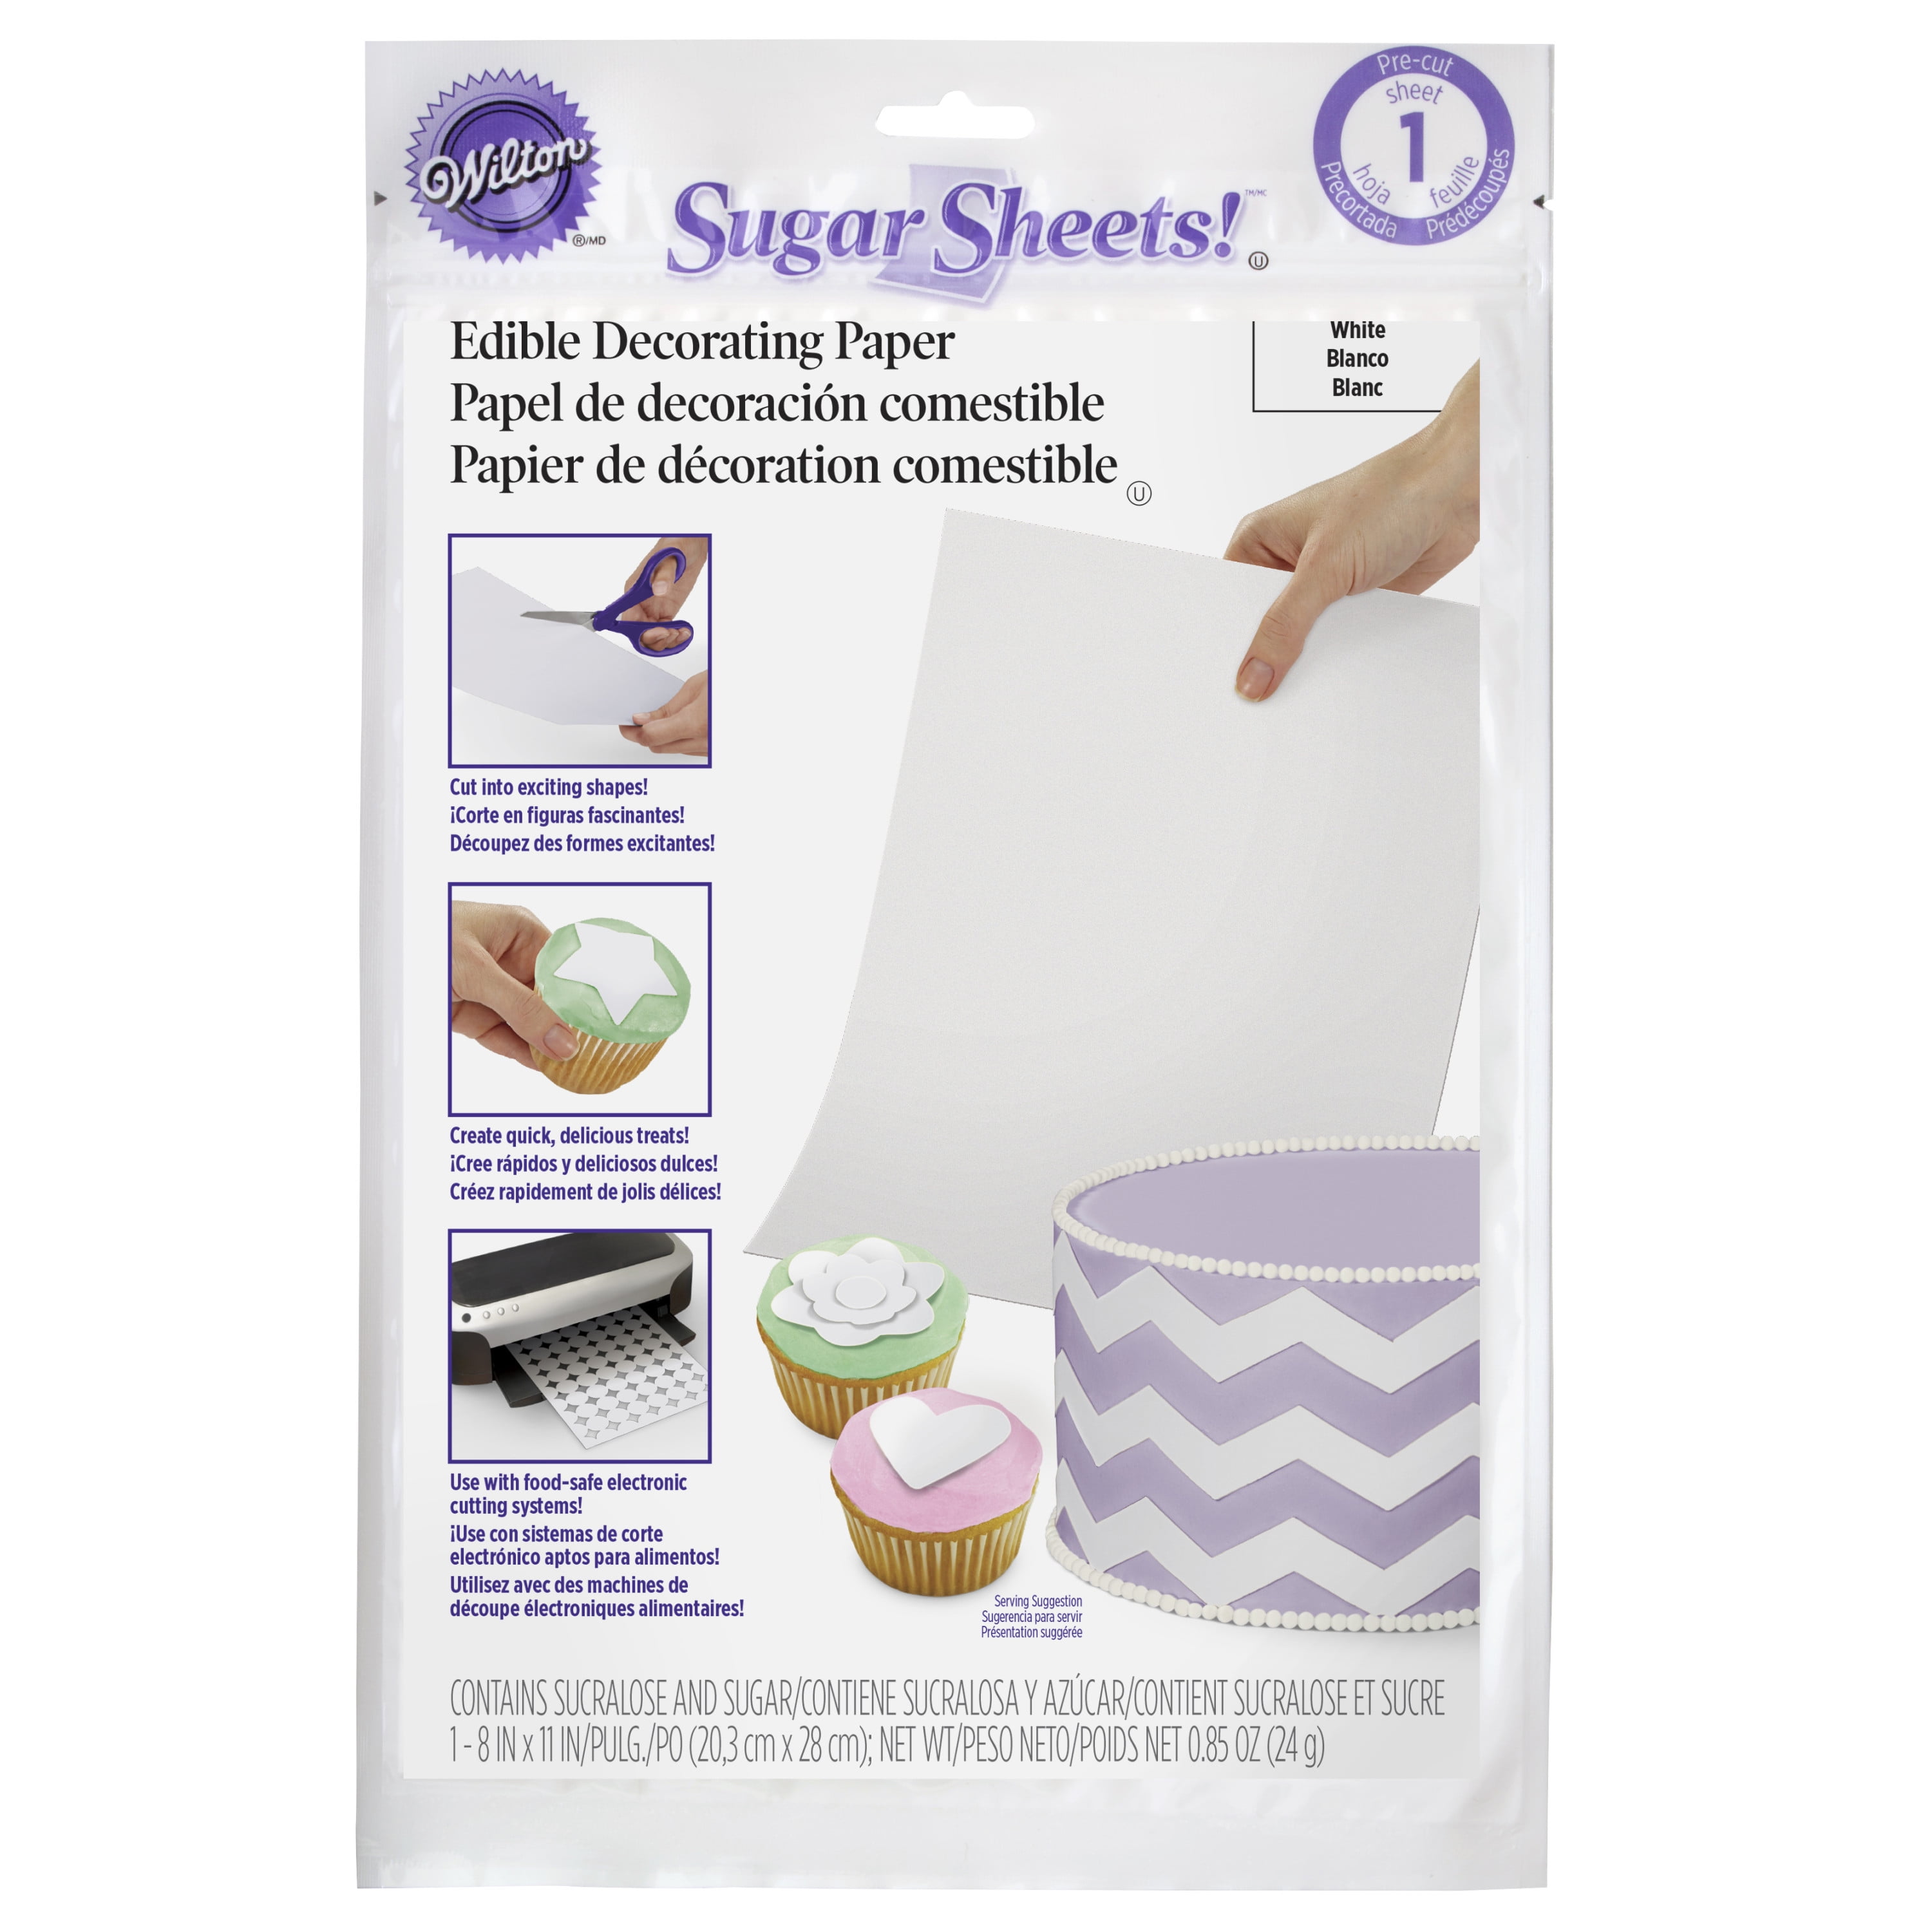 BUY BAKING AND CAKE DECORATIONS ONLINE. SUGARFLAIR EDIBLE WHITE